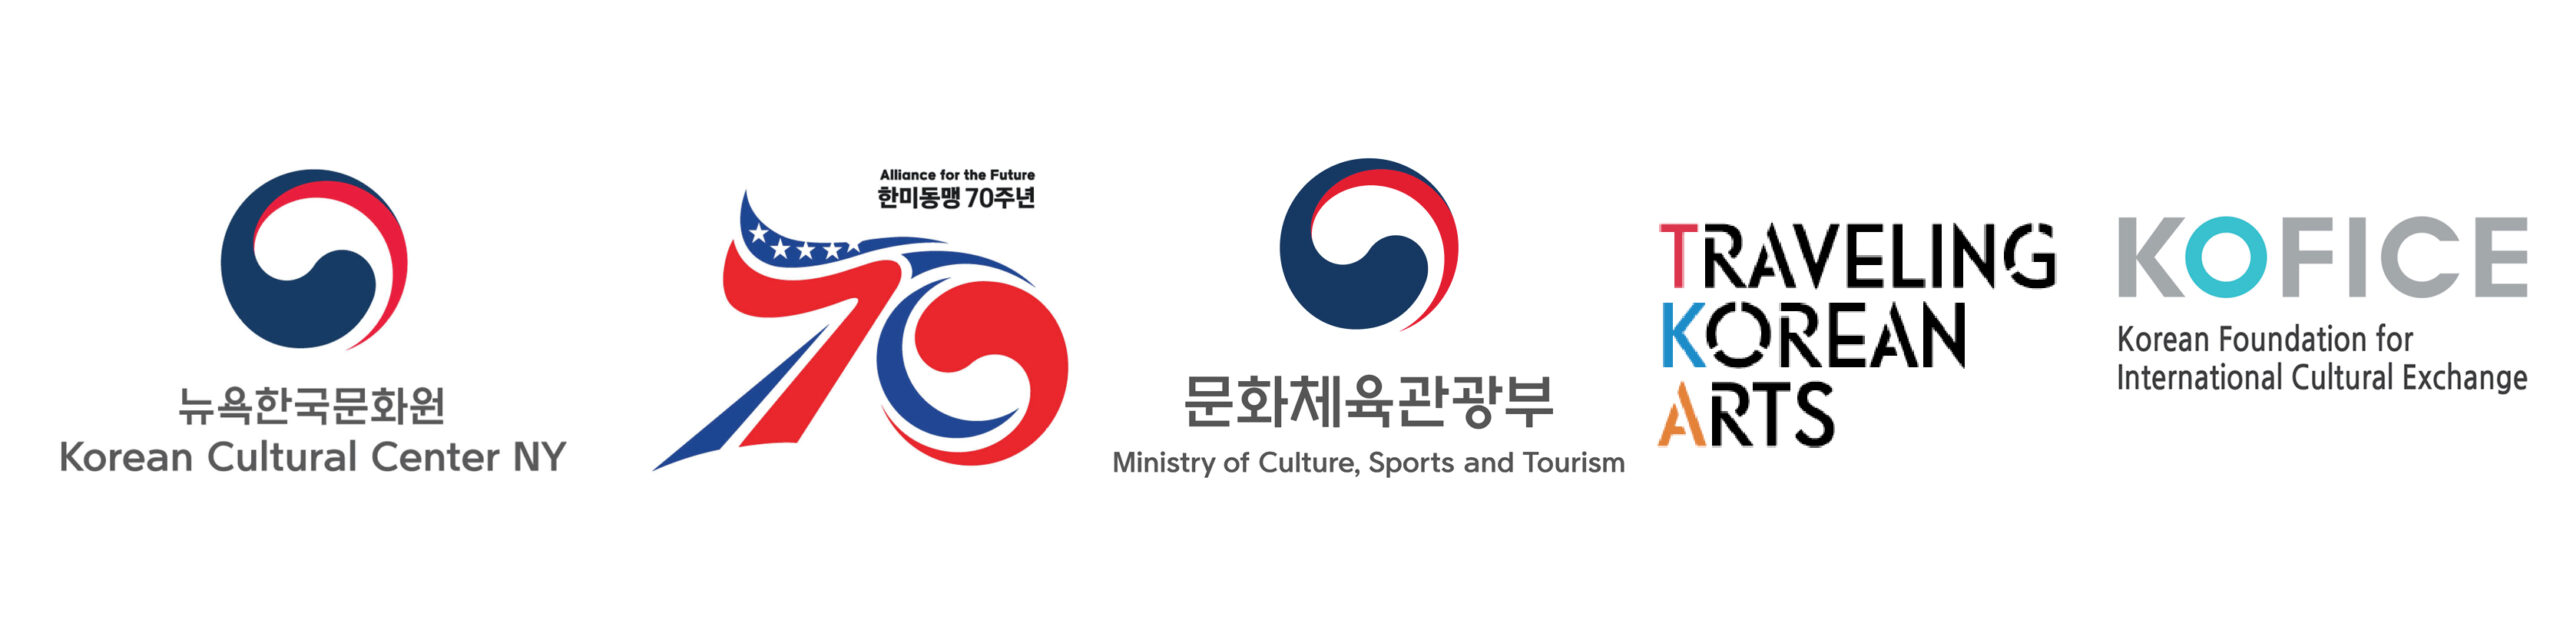 Korean Cultural Center NY to commemorate the 70th anniversary of the ROK-U.S. Alliance. Korean Ministry of Culture, Sports & Tourism. Traveling Korean Arts. KOFFICE Korean Foundation for Intercultural Exchange